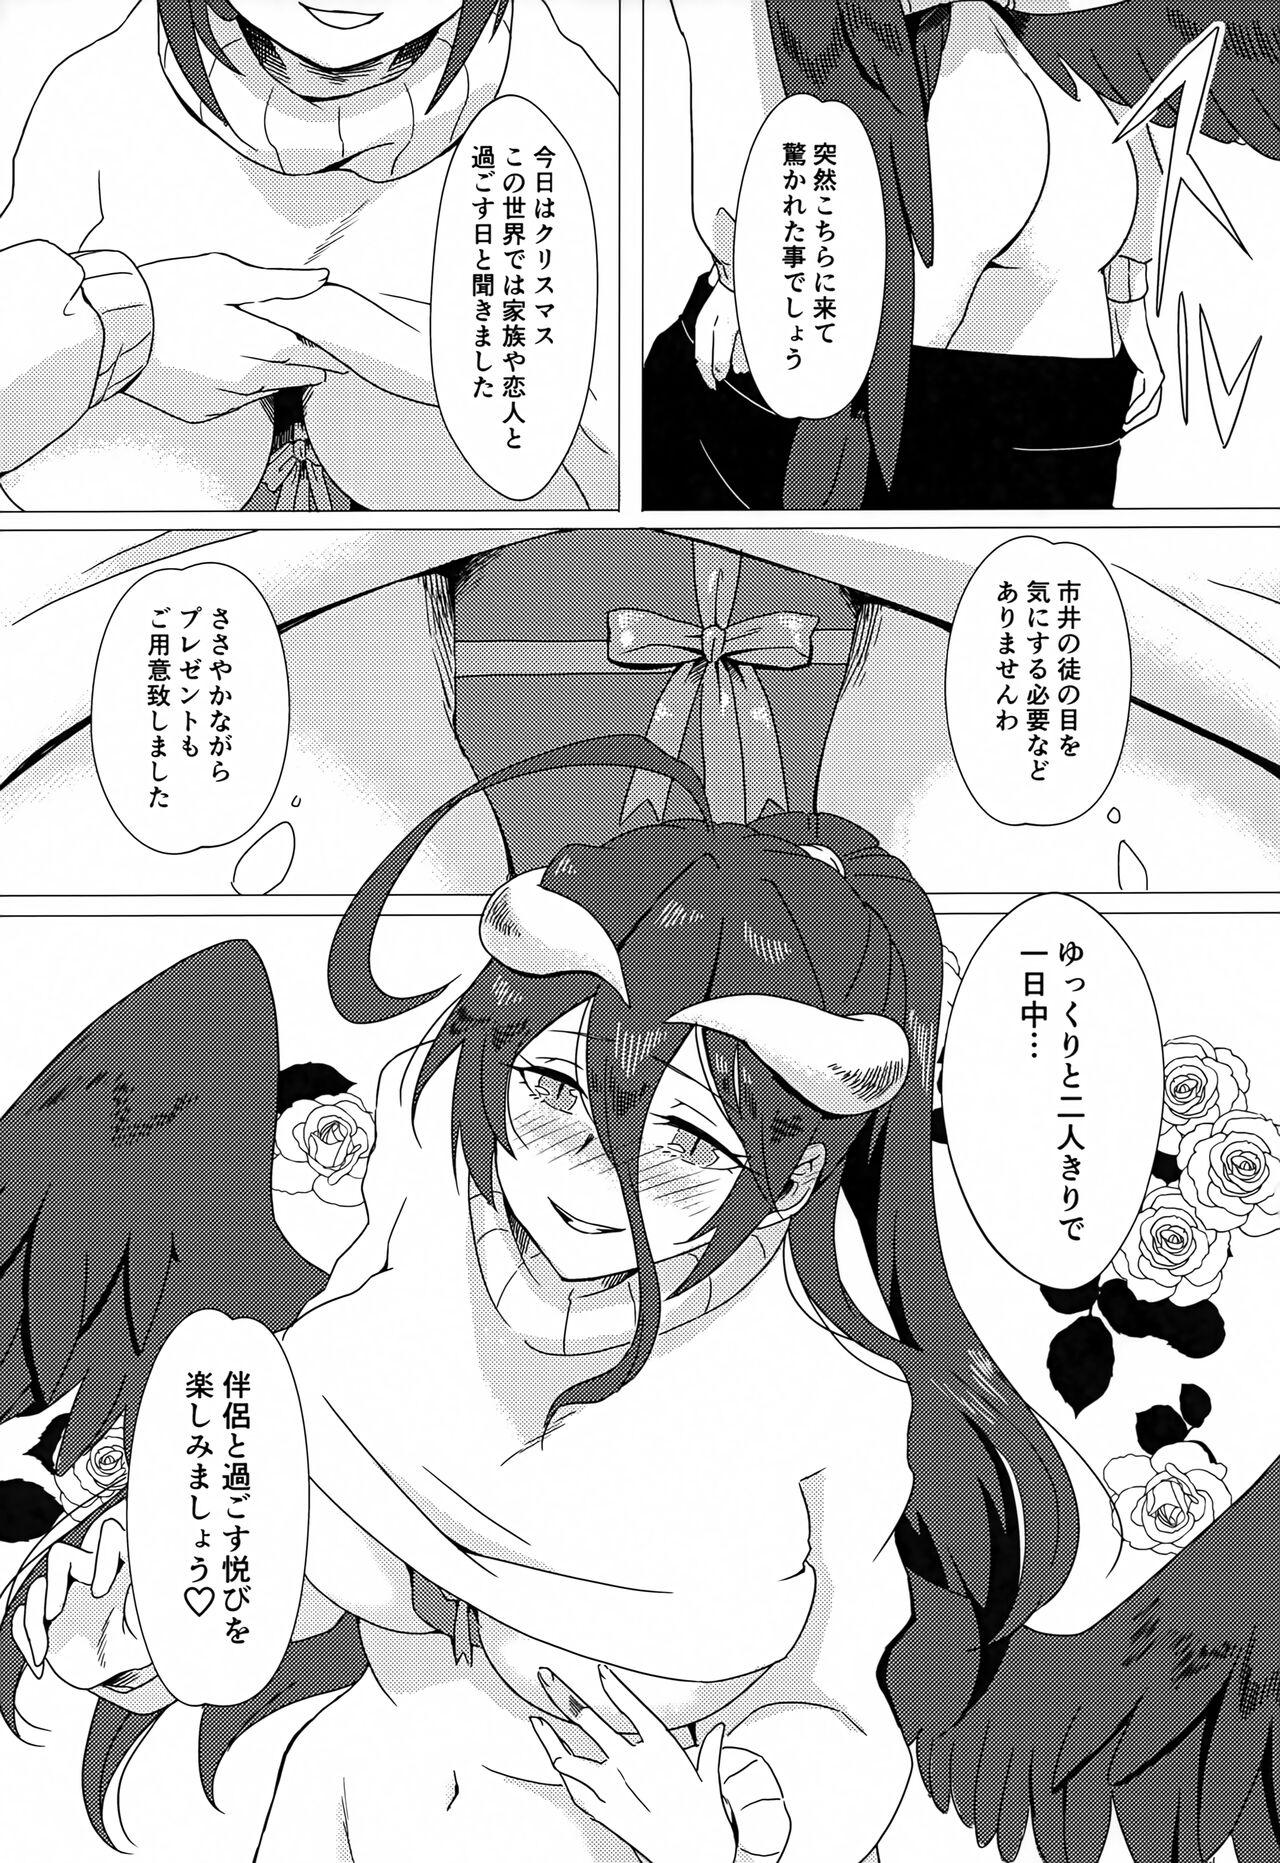 Officesex Albedo-san to! 2 - Overlord Sucking Cocks - Page 8